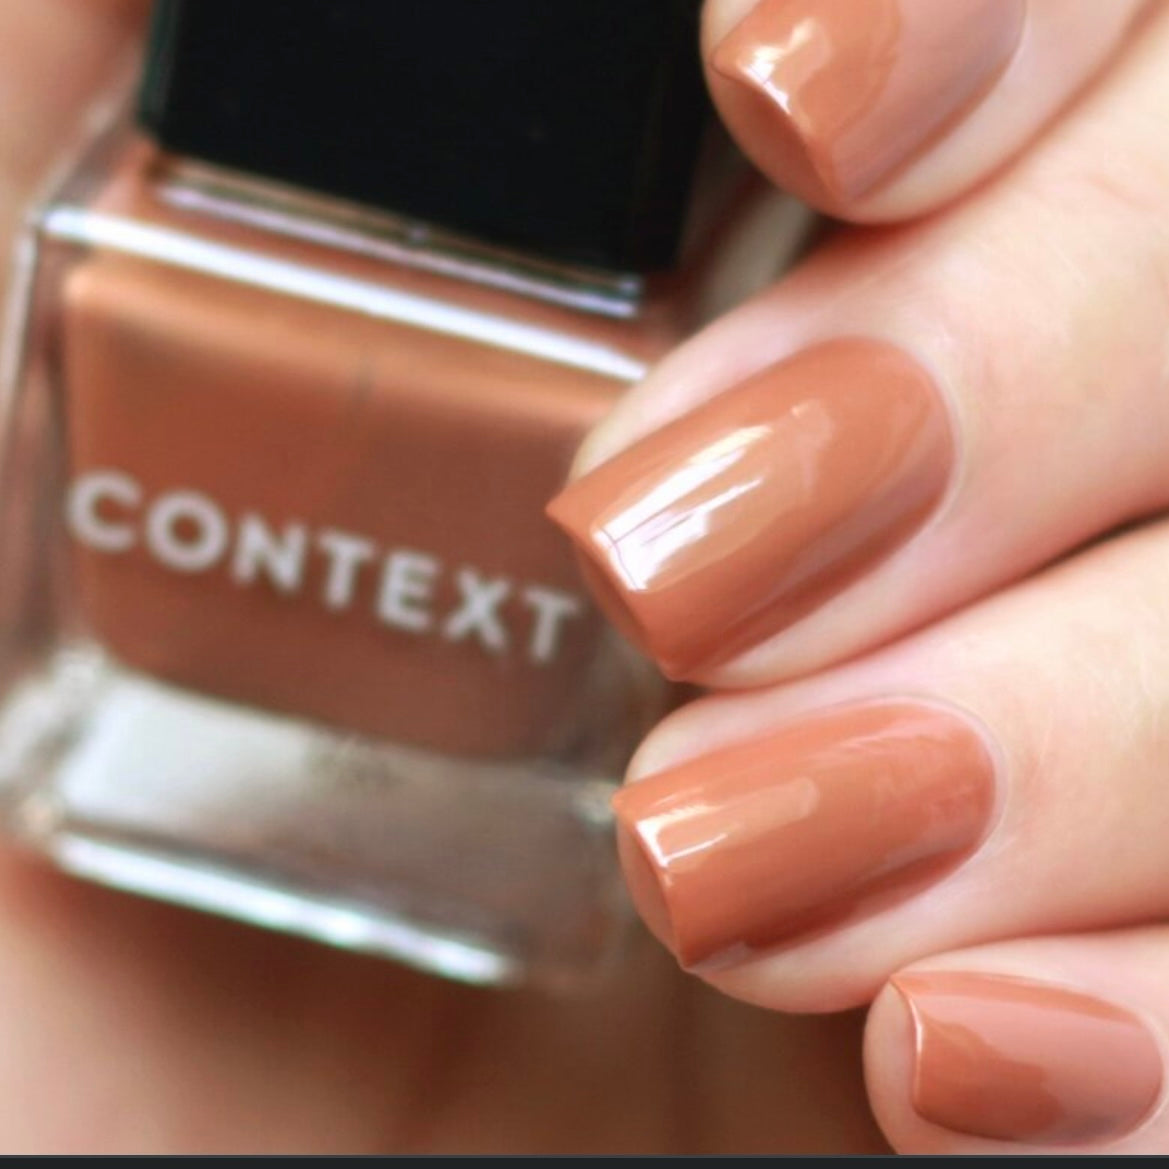 Context Skin Nail Lacquer Duo in Piece of Me & The Last Mile